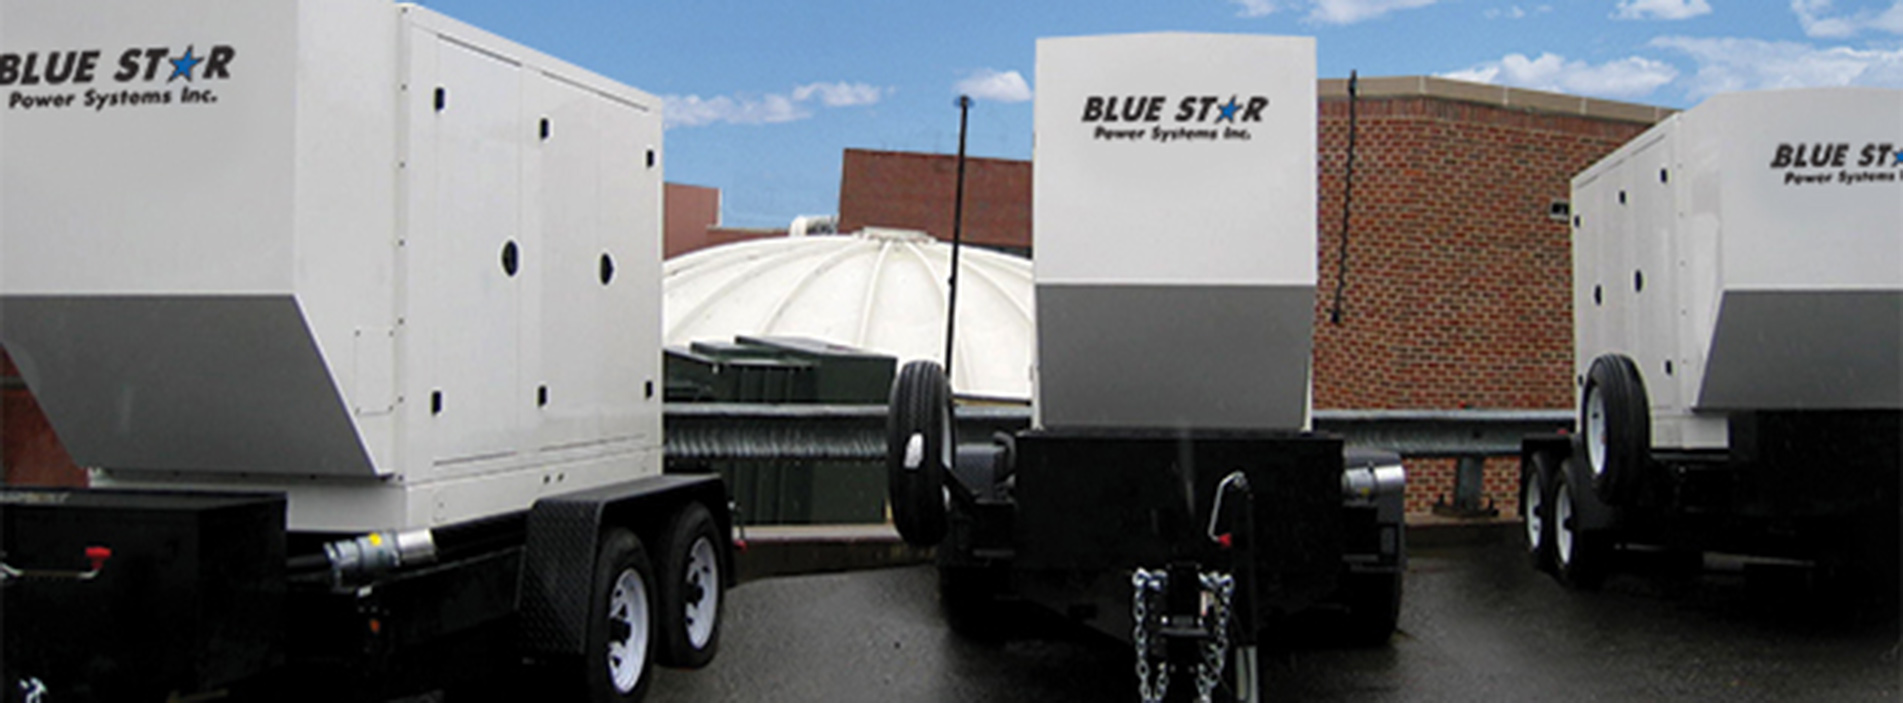 Three commercial Blue Star generator systems.